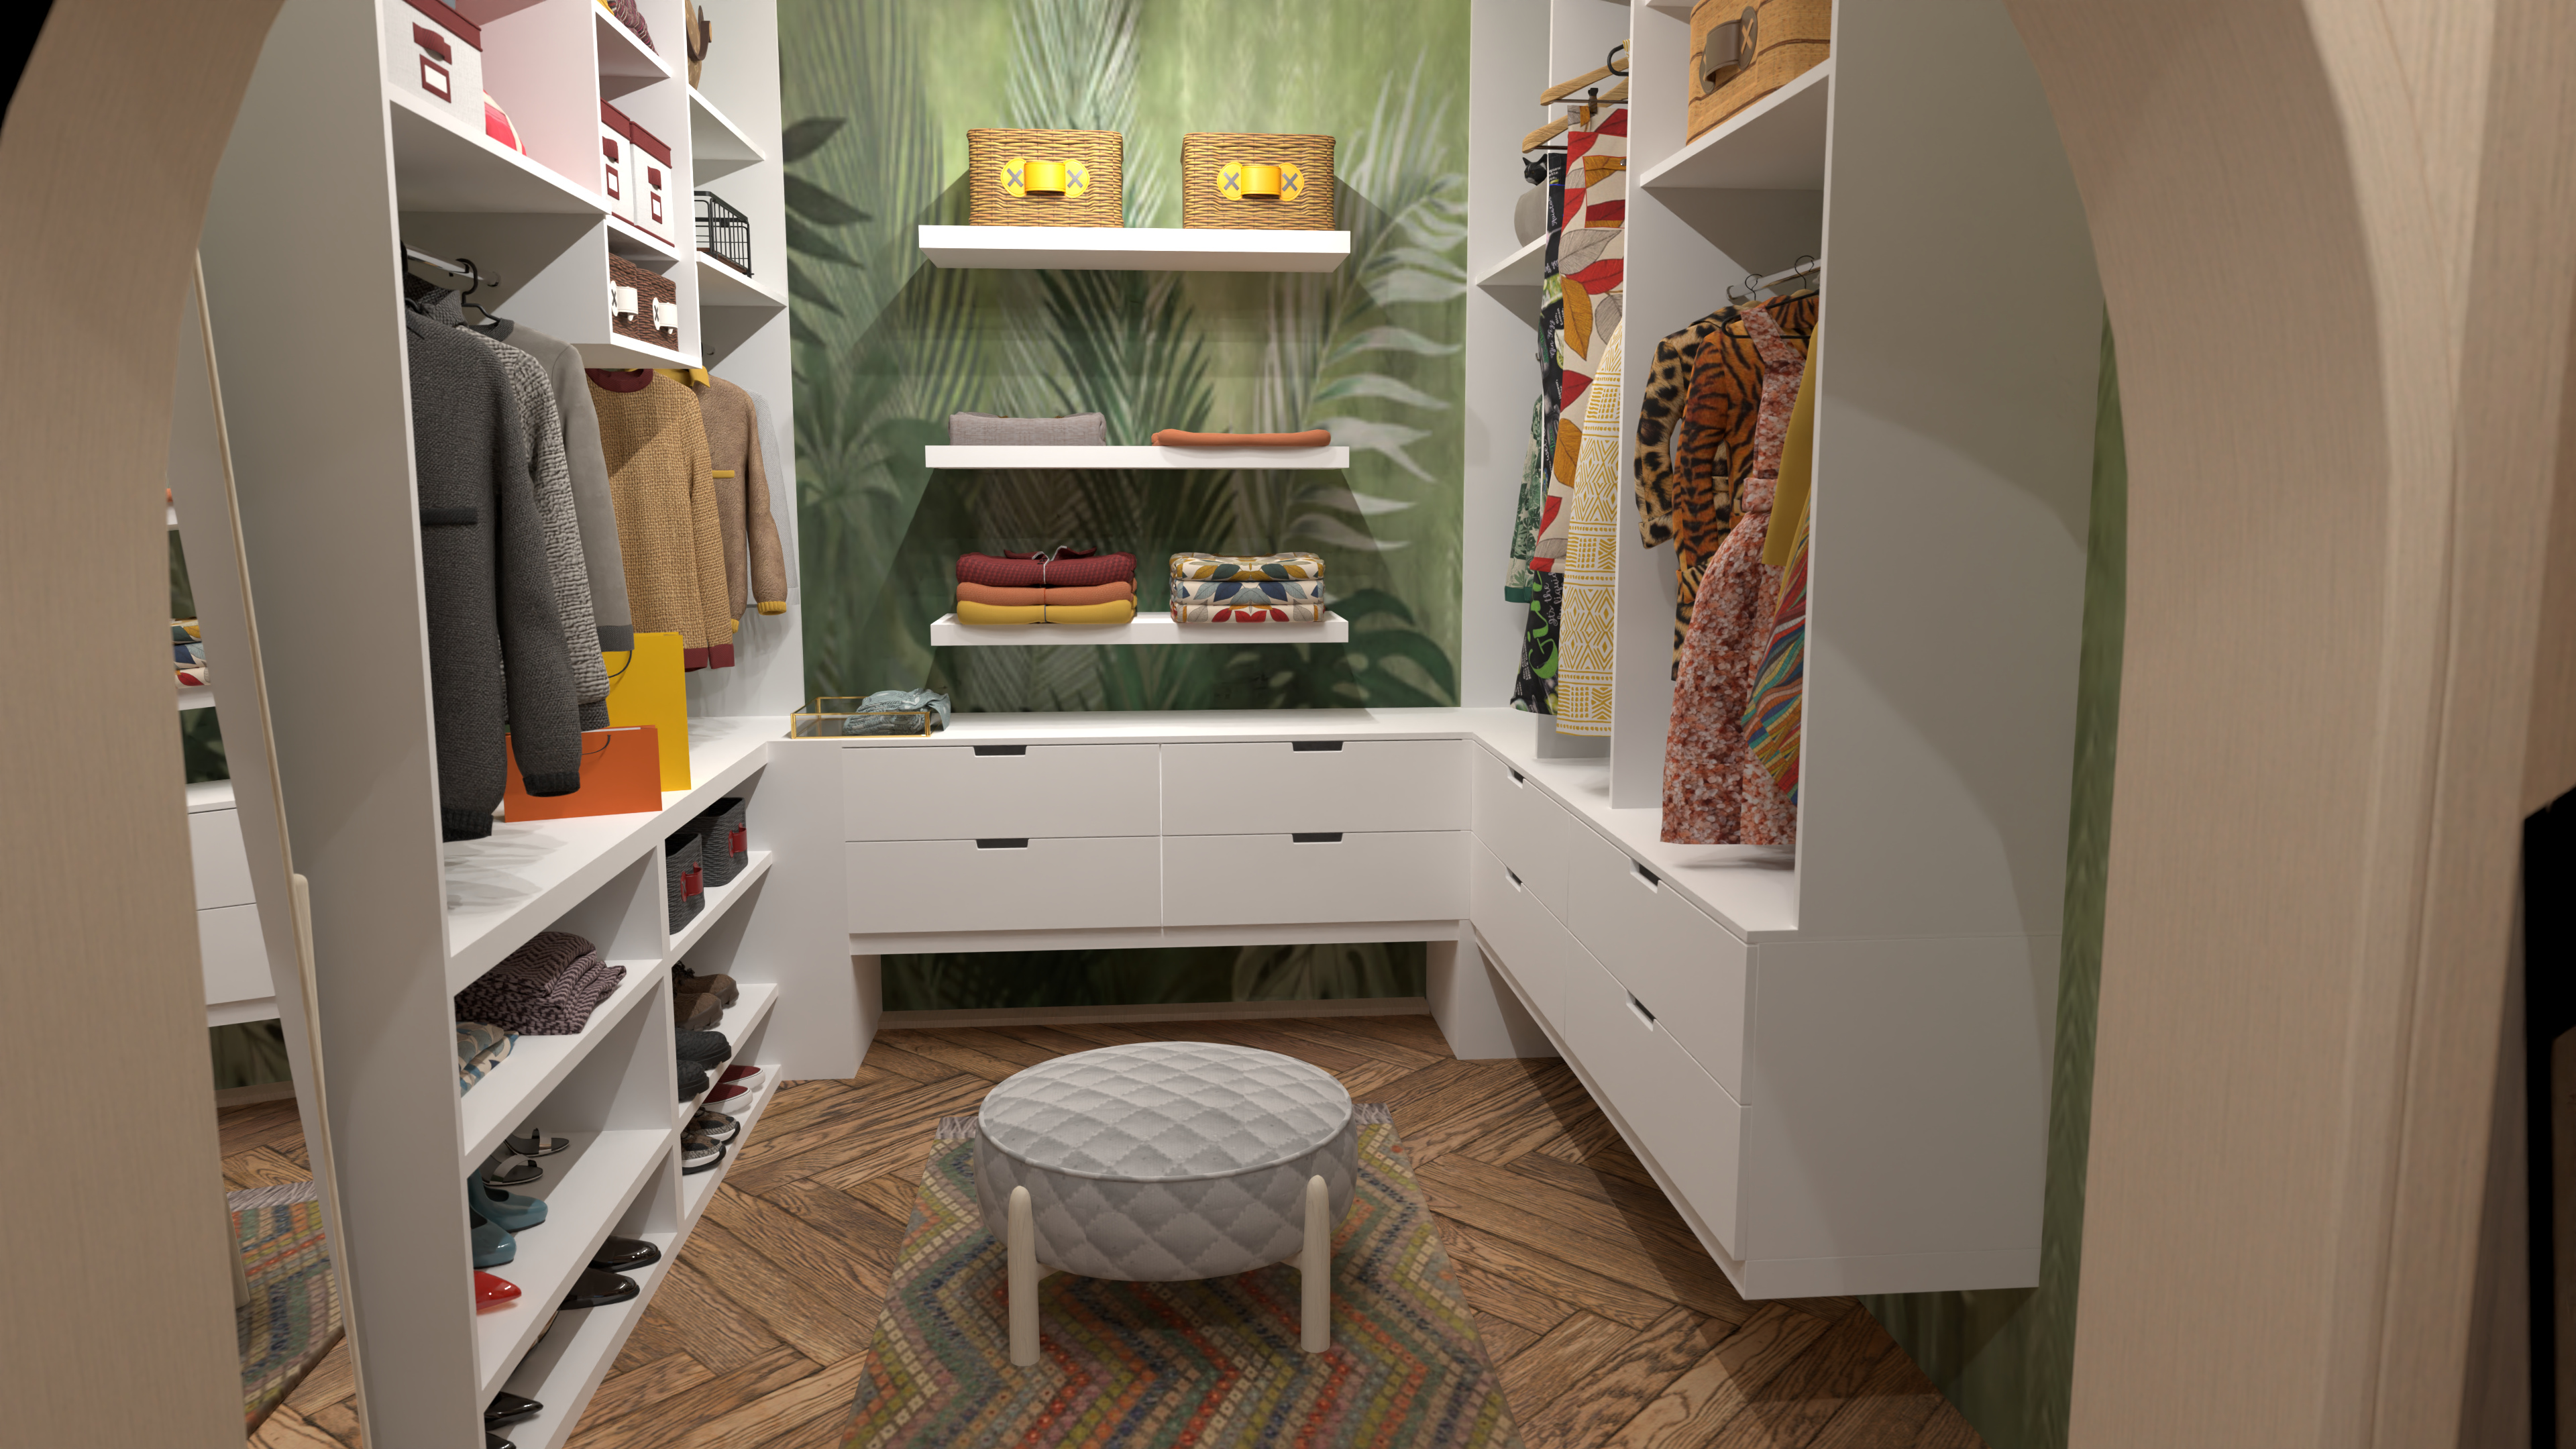 Walk-in closet #1 12888455 by Moonface image